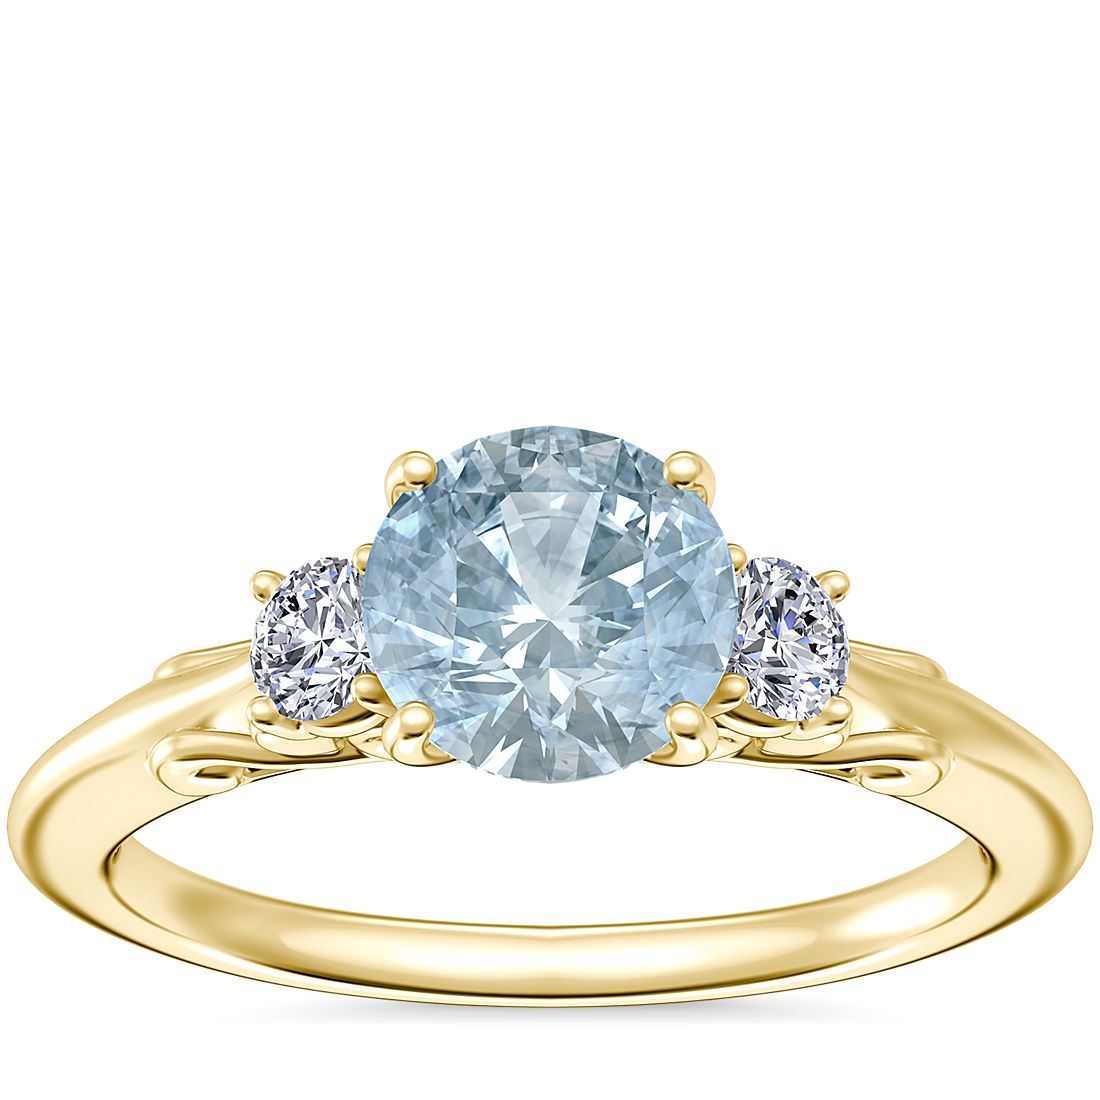 Vintage Three Stone Engagement Ring with Round Aquamarine in 14k Yellow Gold (6.5mm)